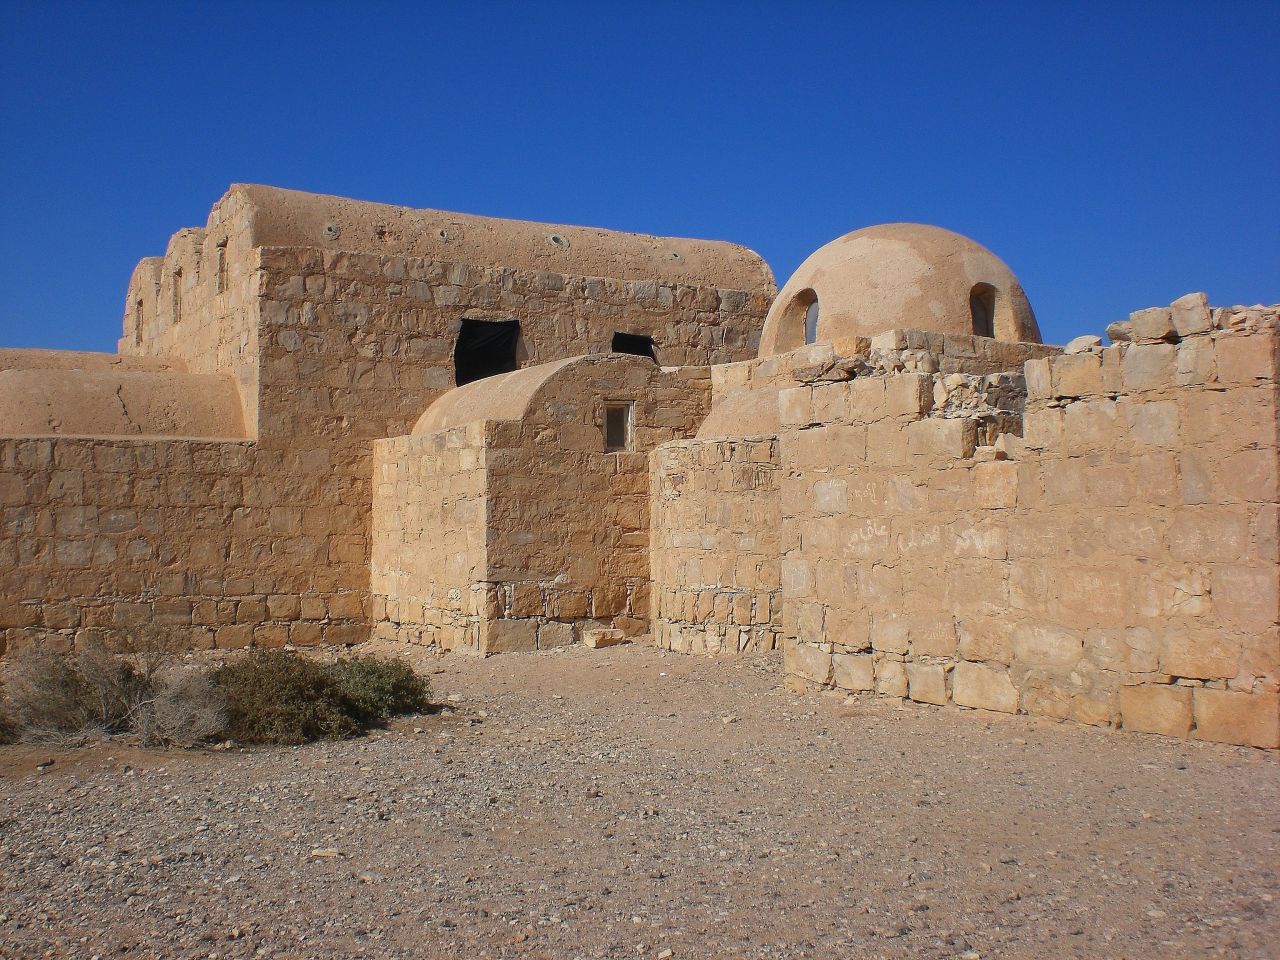 If you like ruins, Jordan won't let you down. The Greek, Roman, Byzantine and Arab Empires stamped their hand prints across the countryside. On the desert castle loop you'll find ancient Umm Qais, the Umayyad caliphs' country retreats of Azraq Fort and the UNESCO-listed Qasr Amr (pictured).